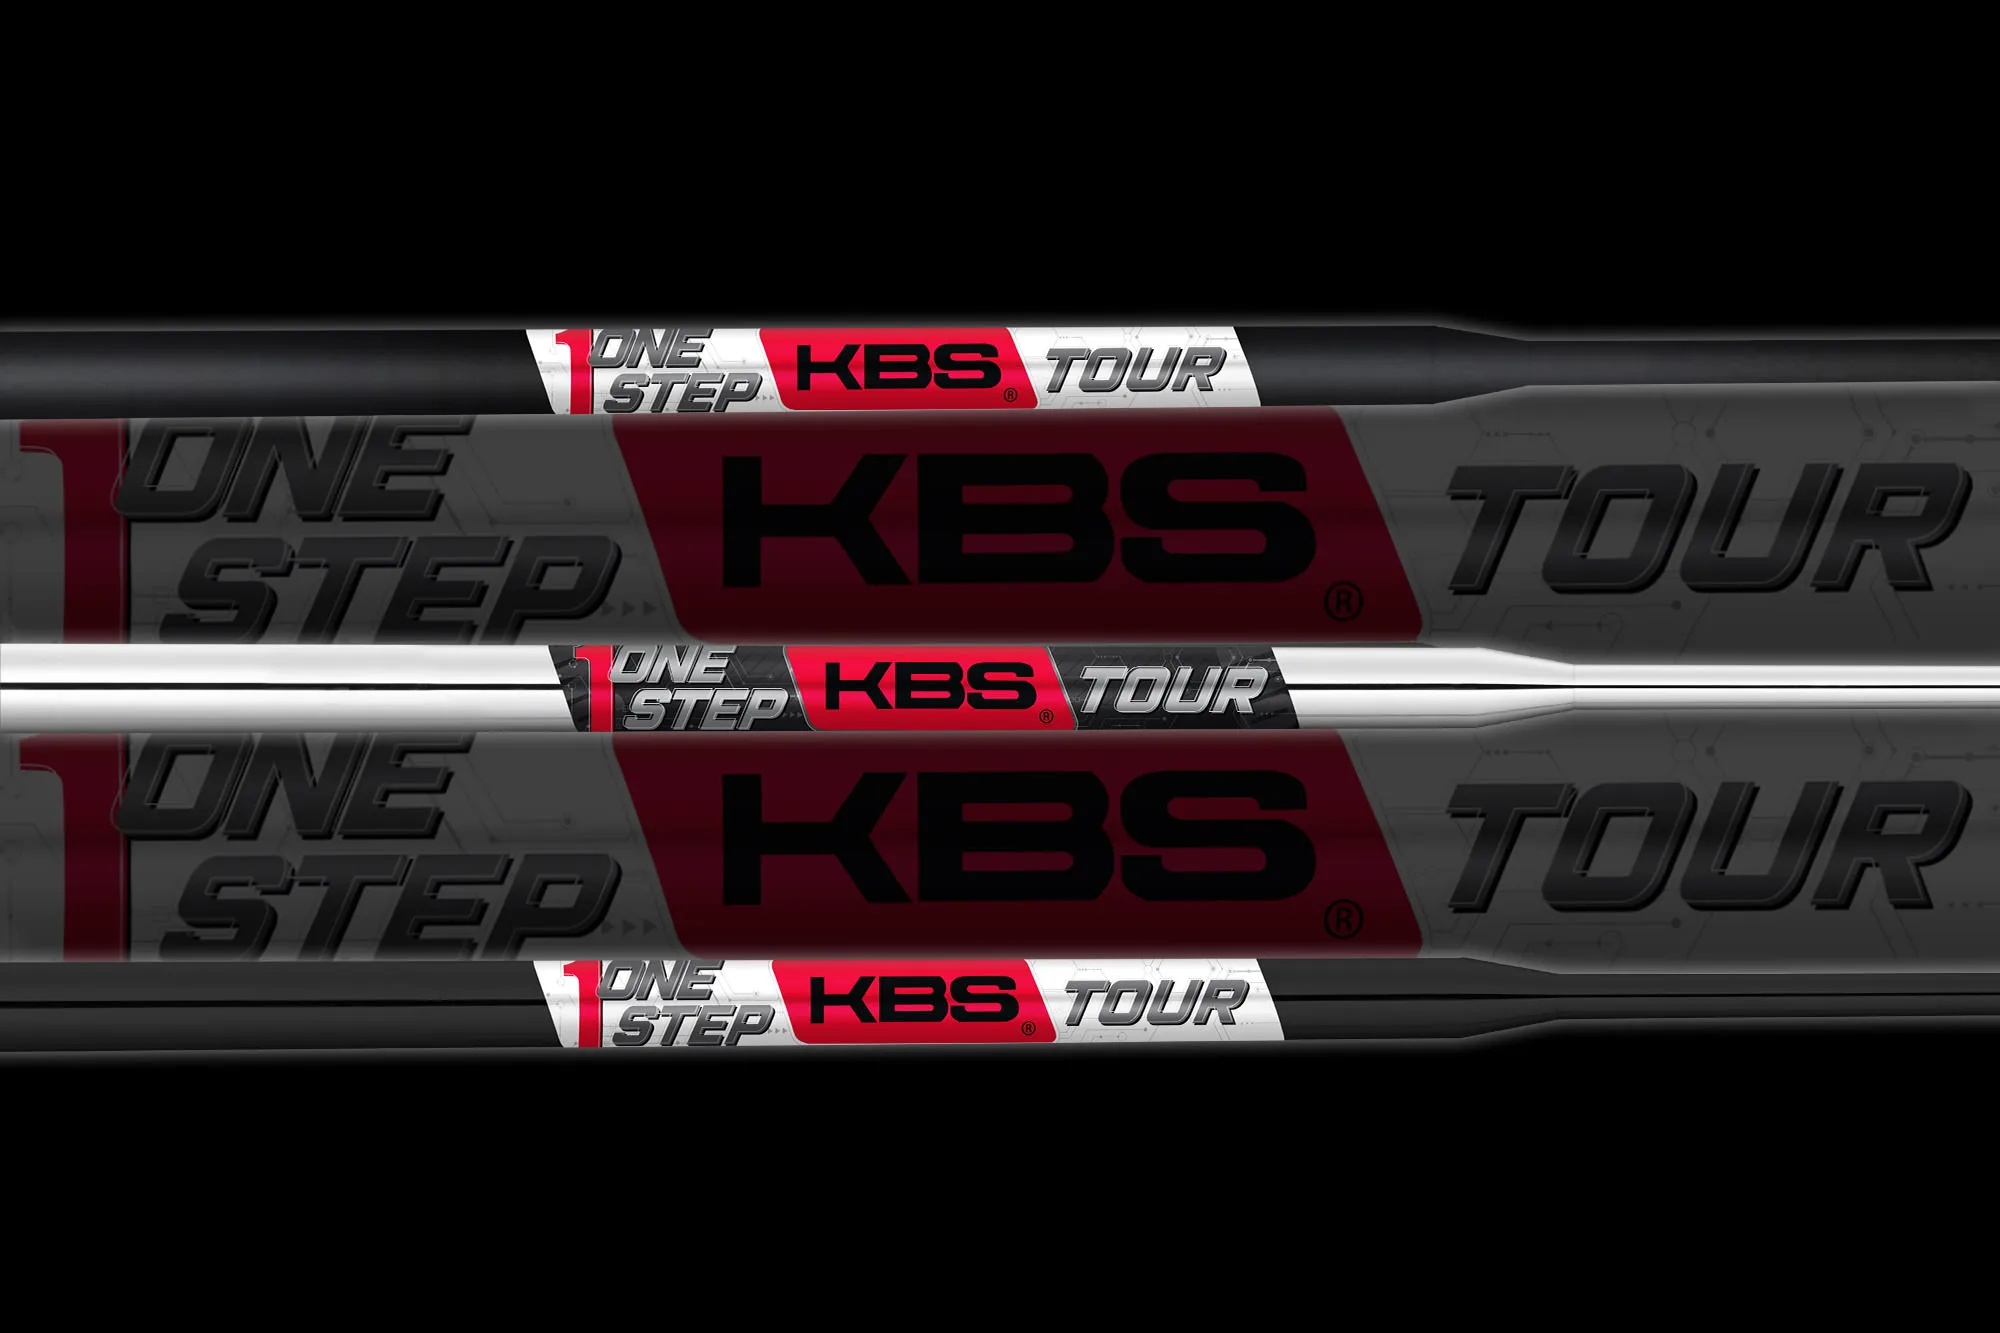 WIN a KBS shaft fitting at Tour X!